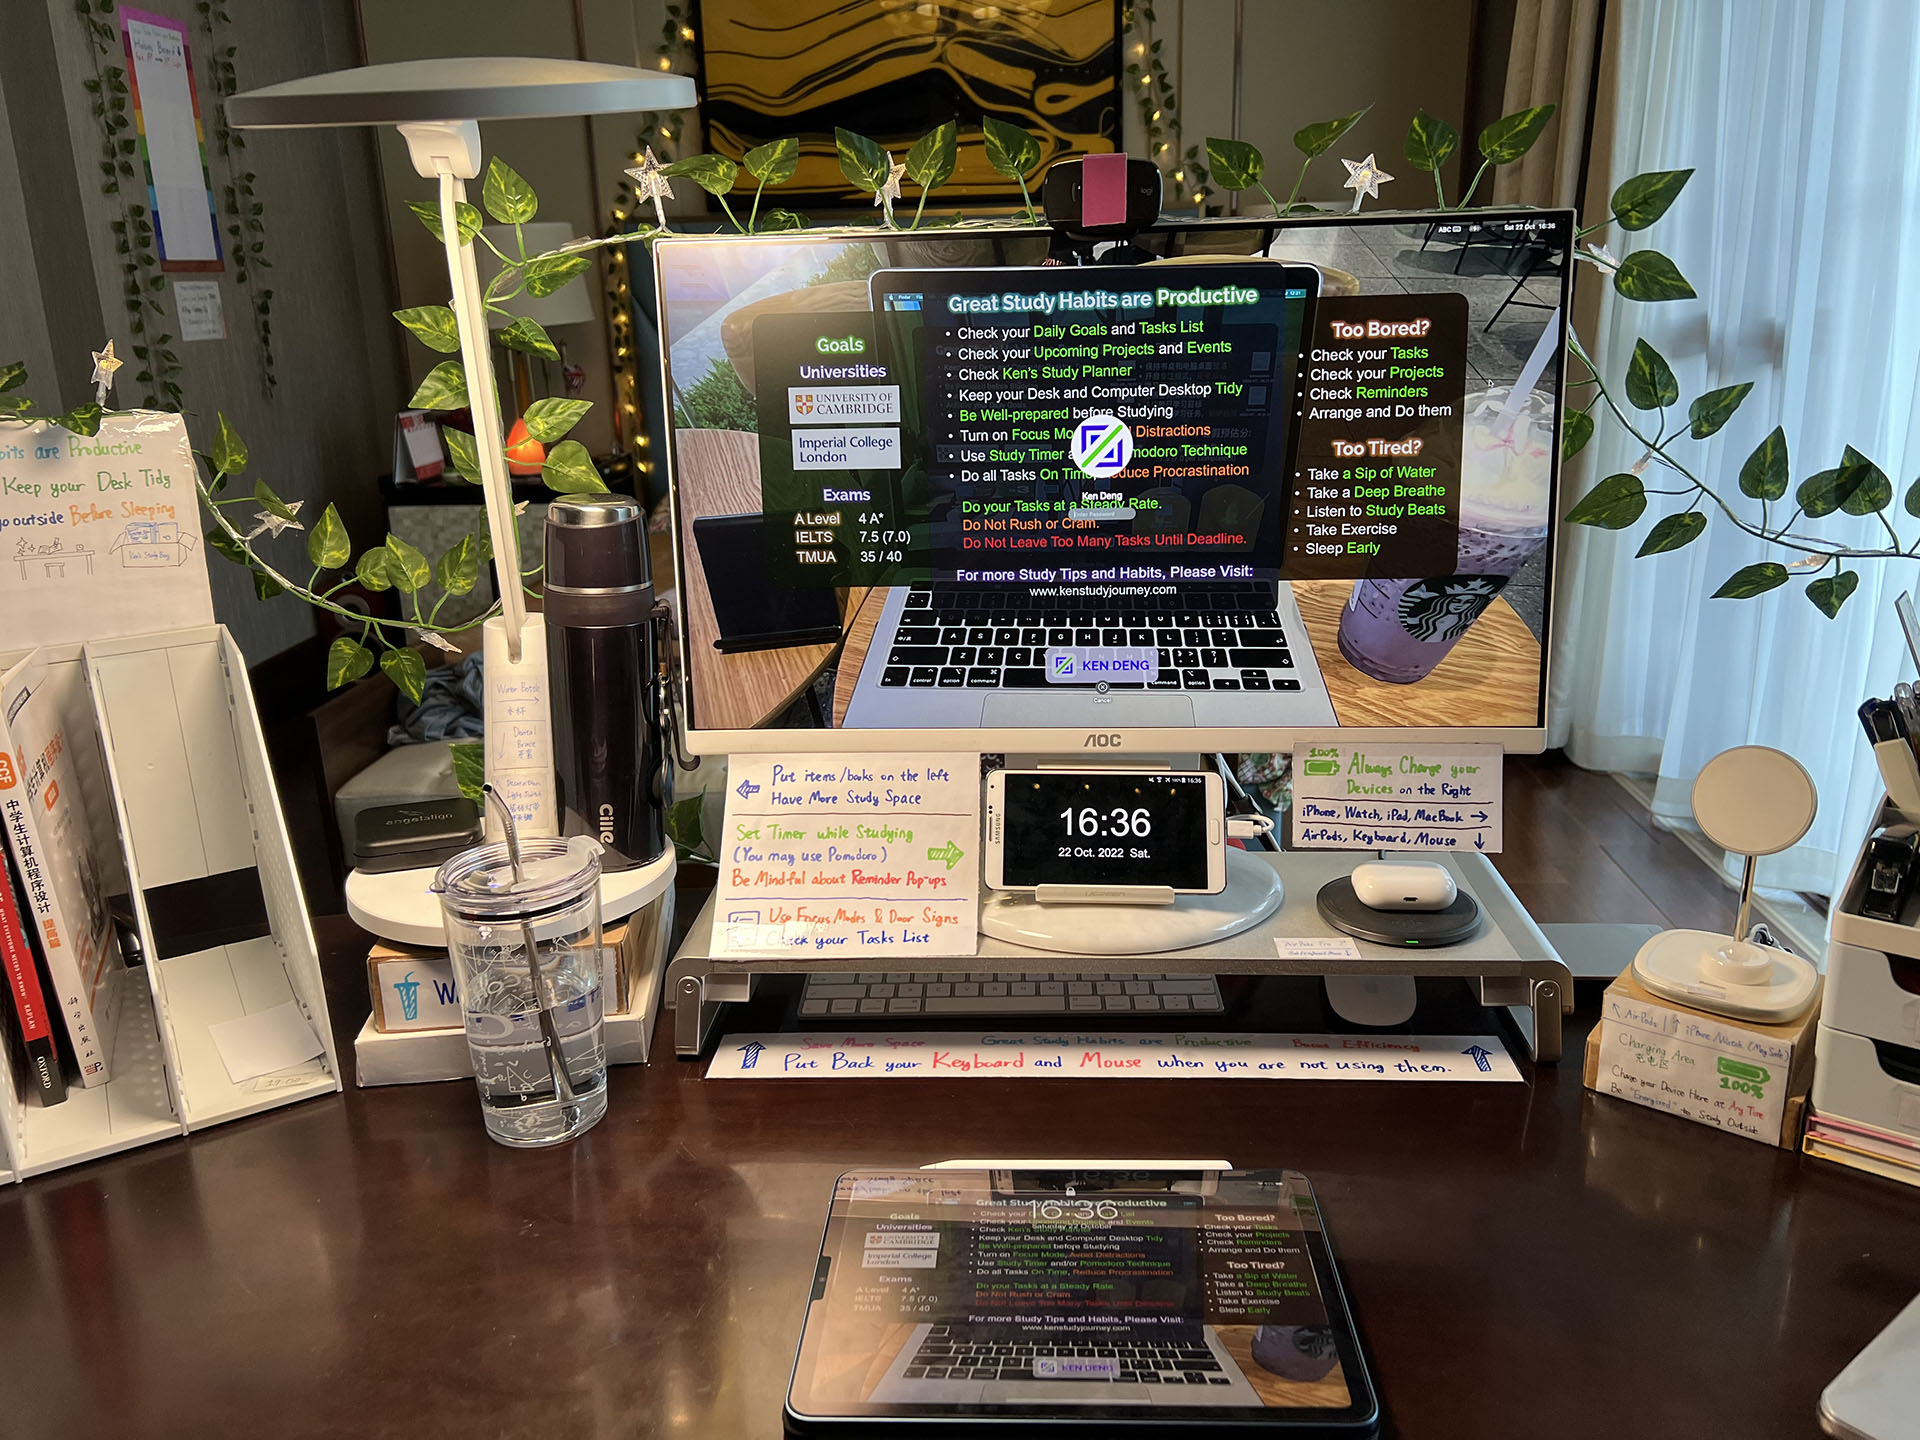 Overview of My Home Desk Study Environment